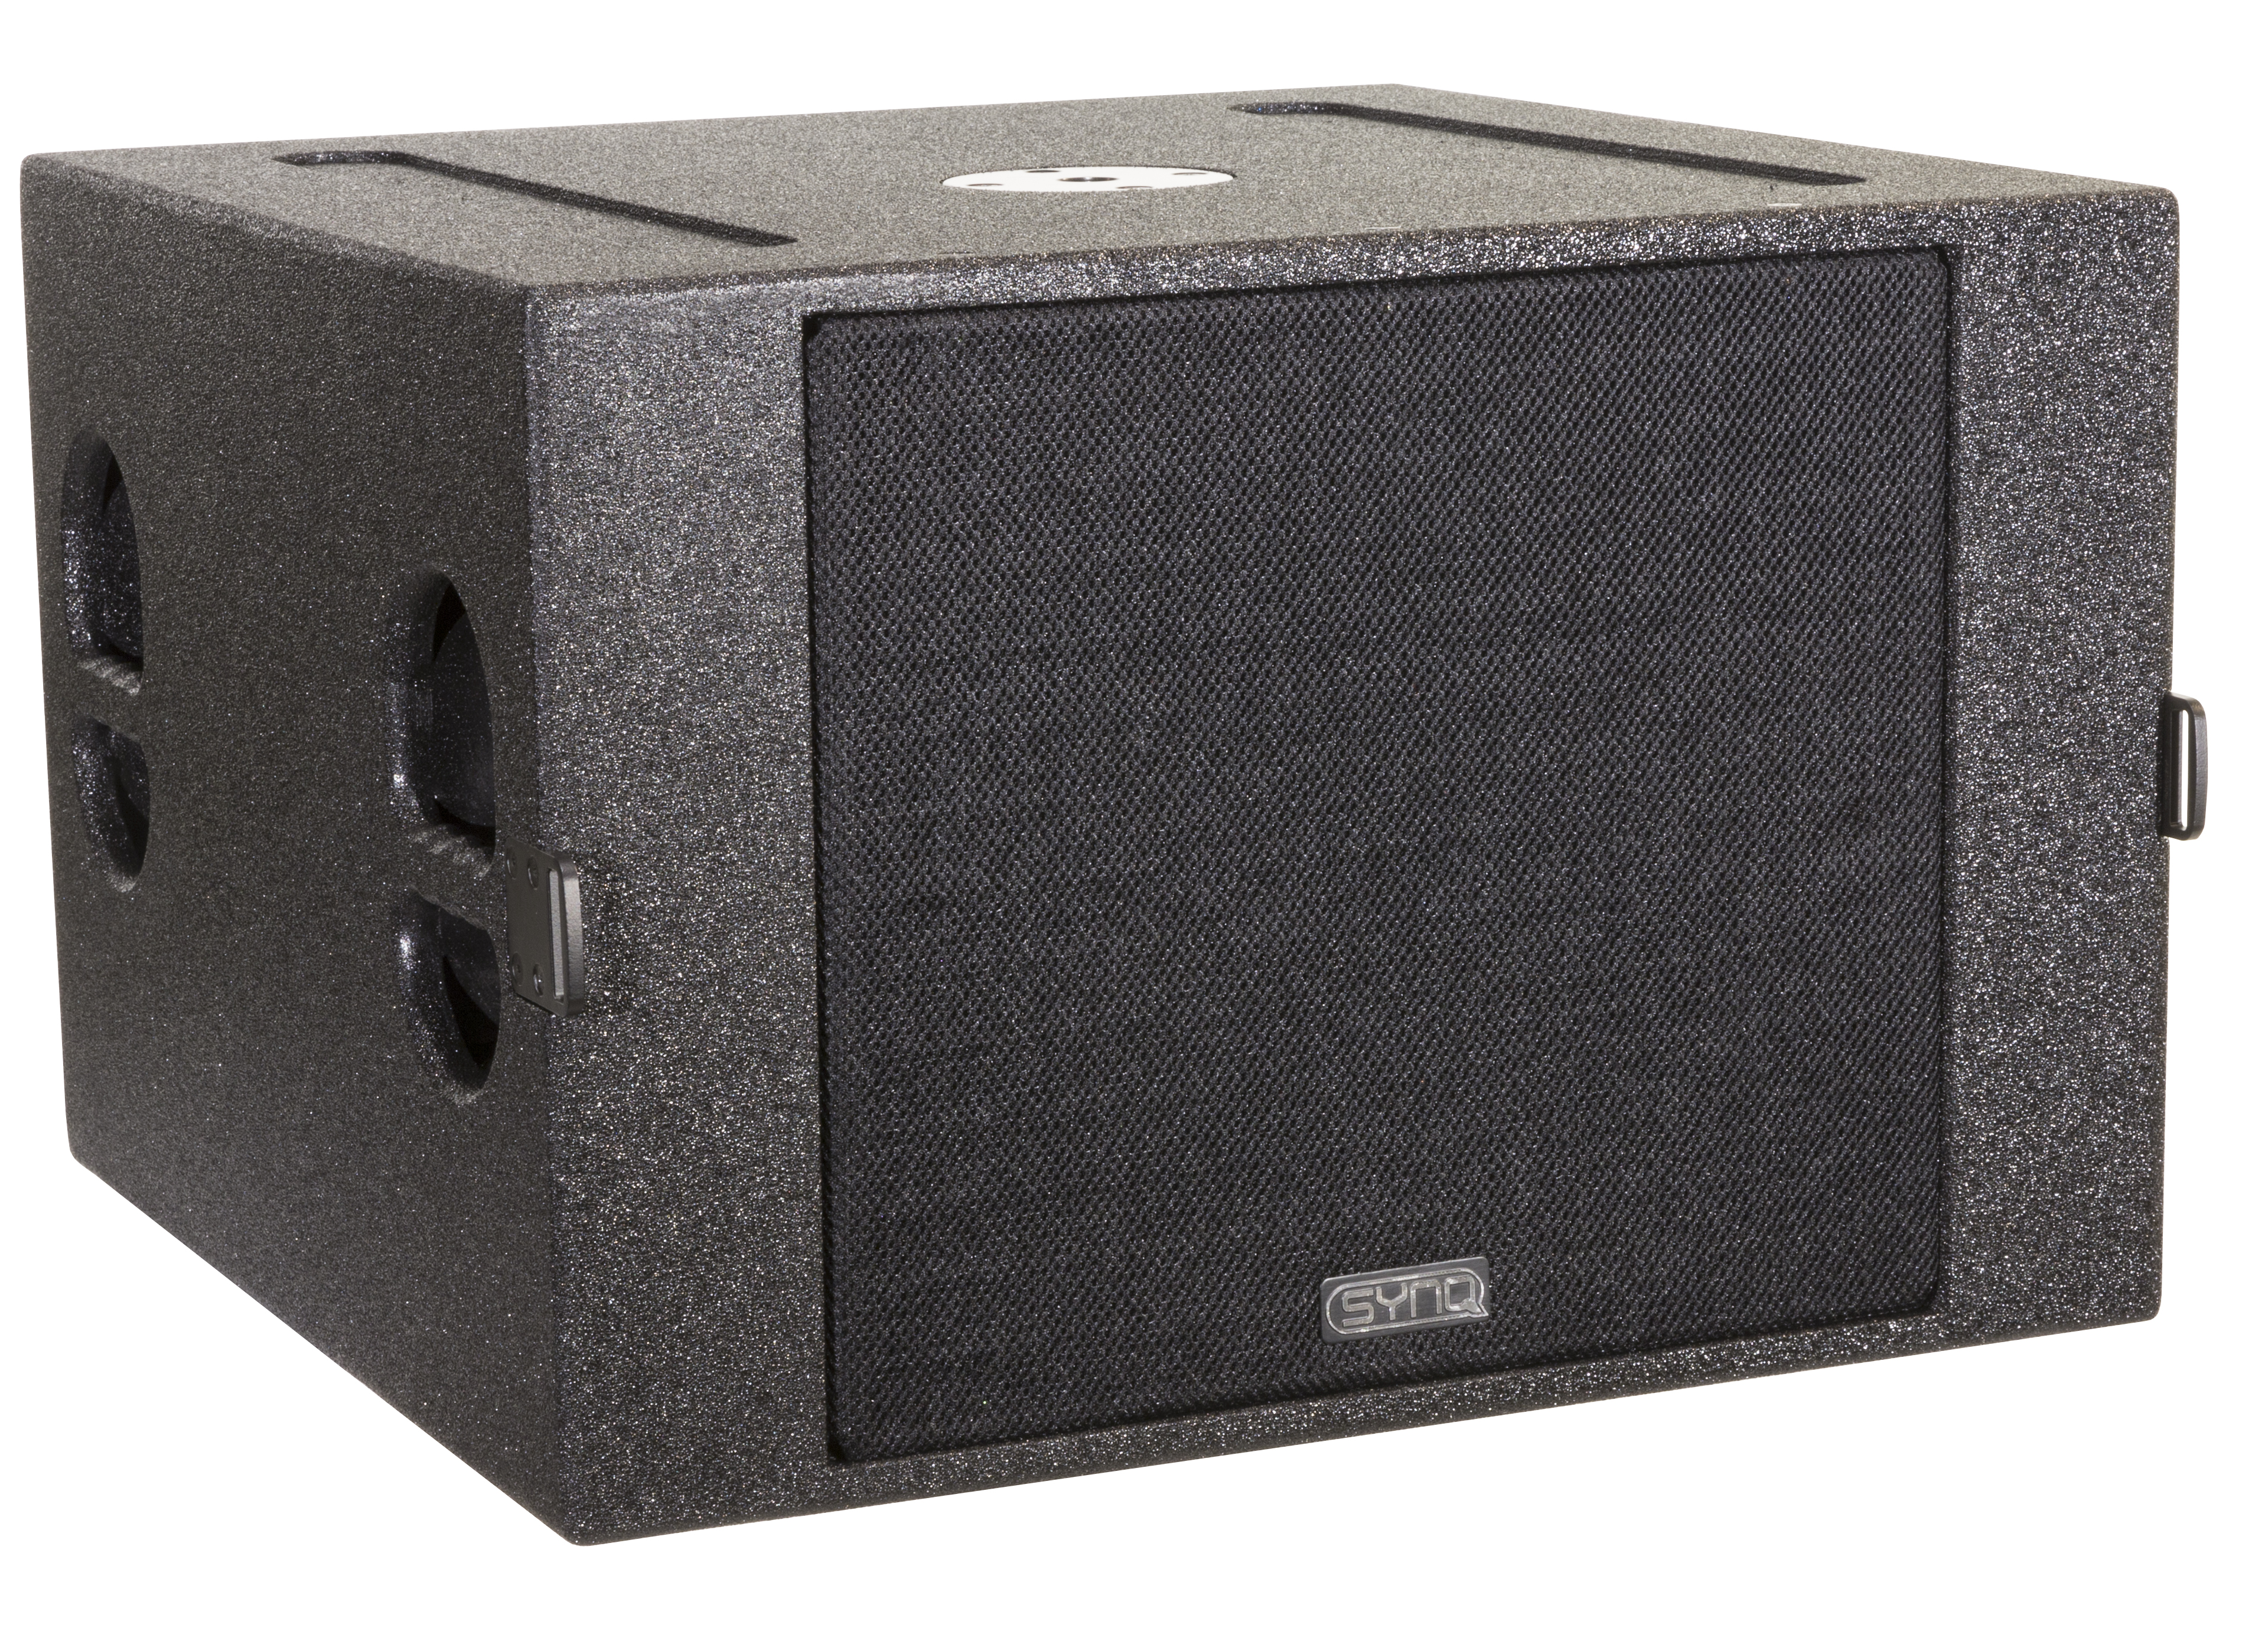 Extremely powerful and compact double 12" subwoofer